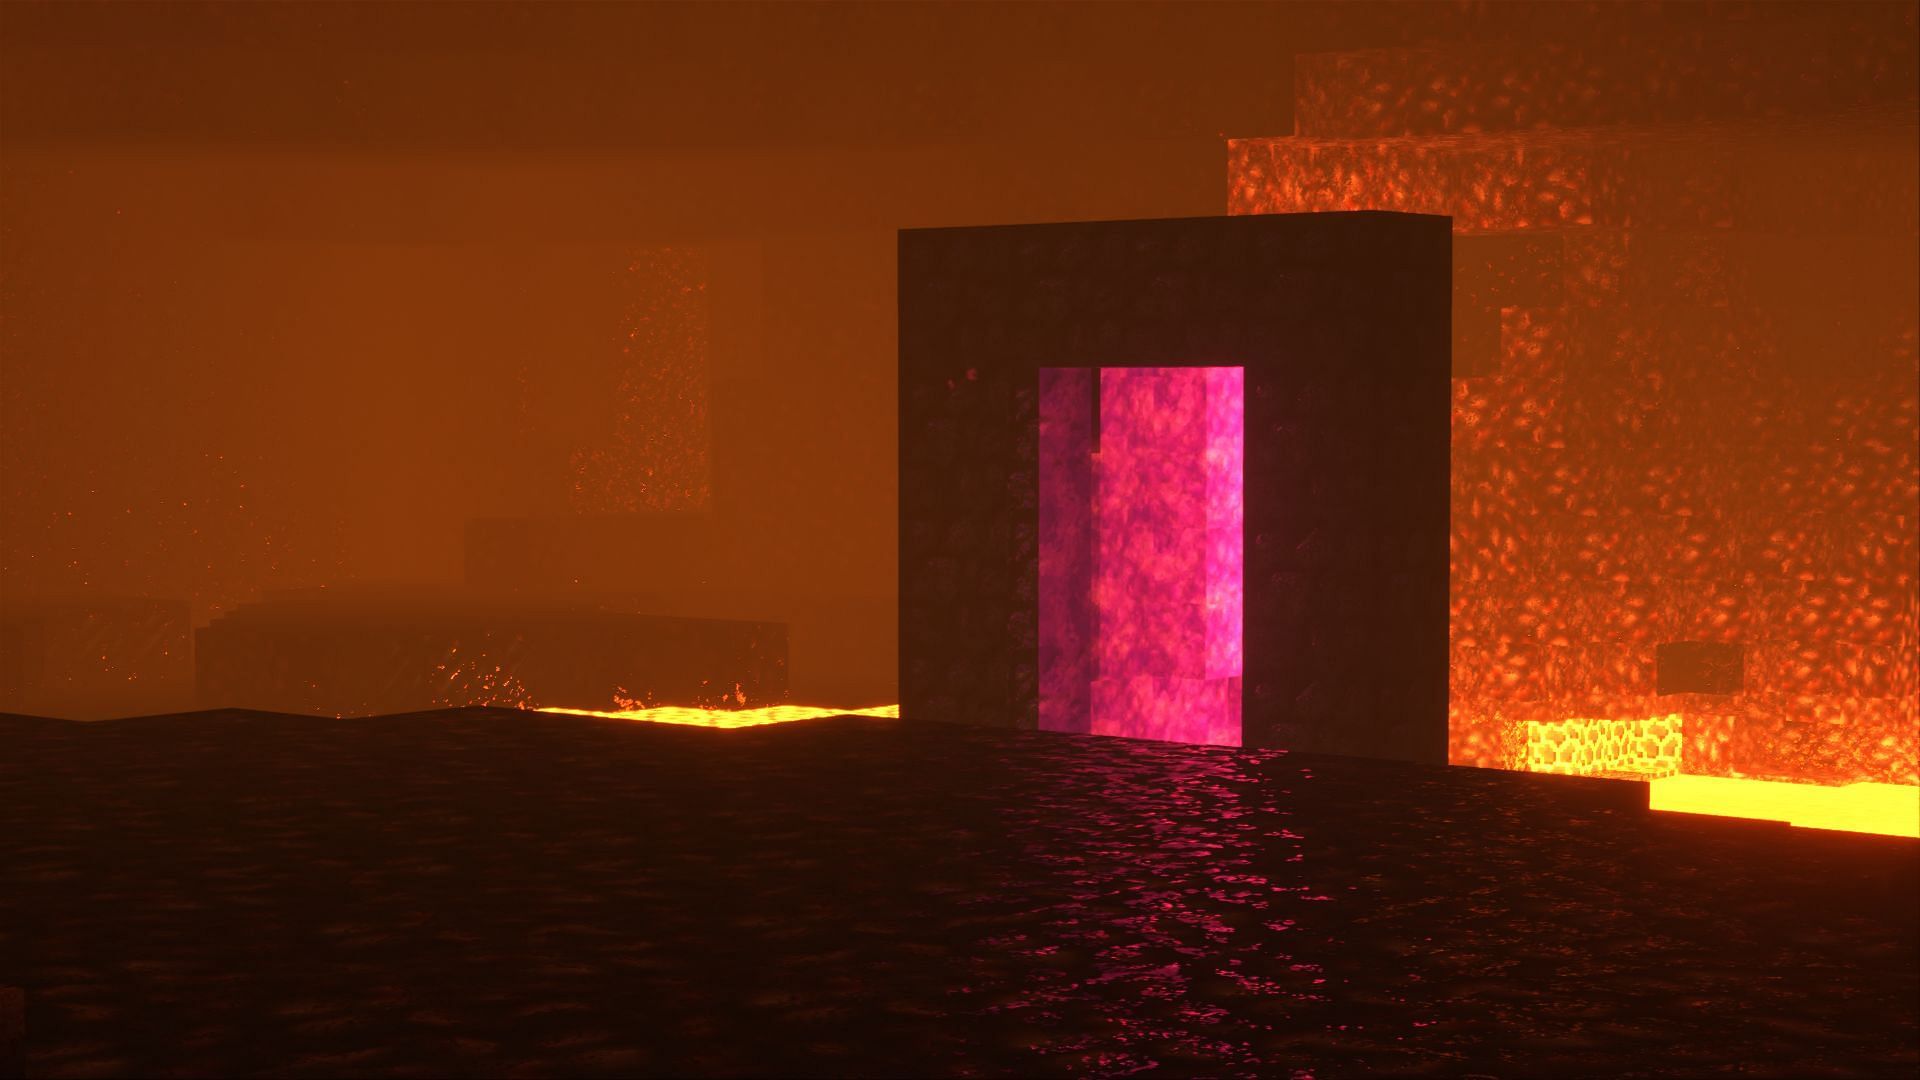 460628 Minecraft nether, torches, blurred, Minecraft, fire - Rare Gallery  HD Wallpapers